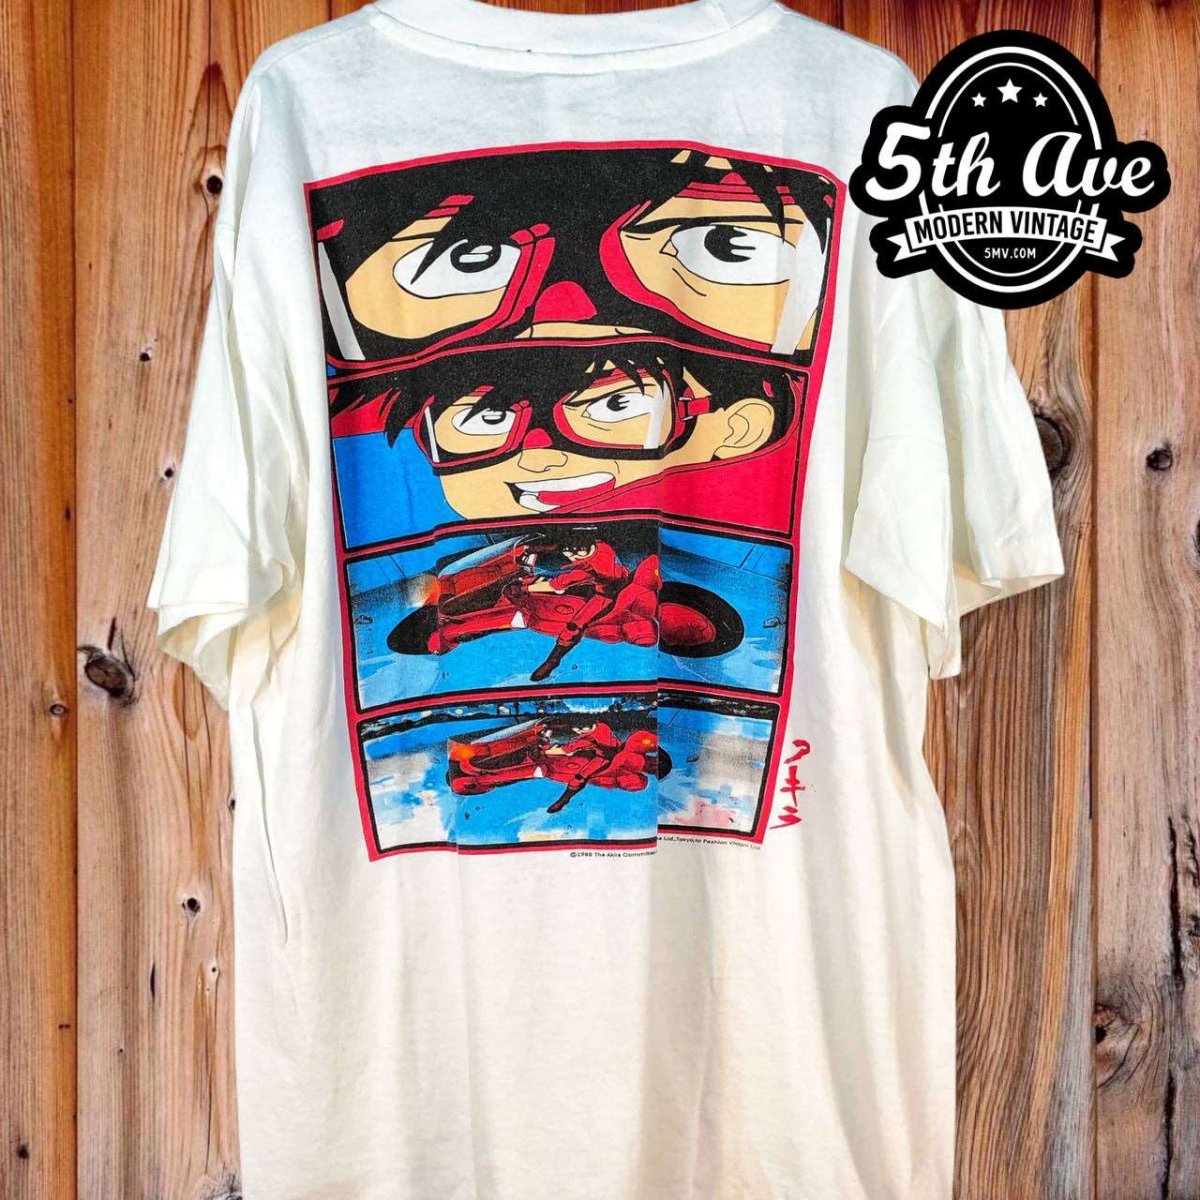 Akira: Motorcycle Chronicles - White Single Stitch t shirt with Dual-Faced Design - Vintage Band Shirts